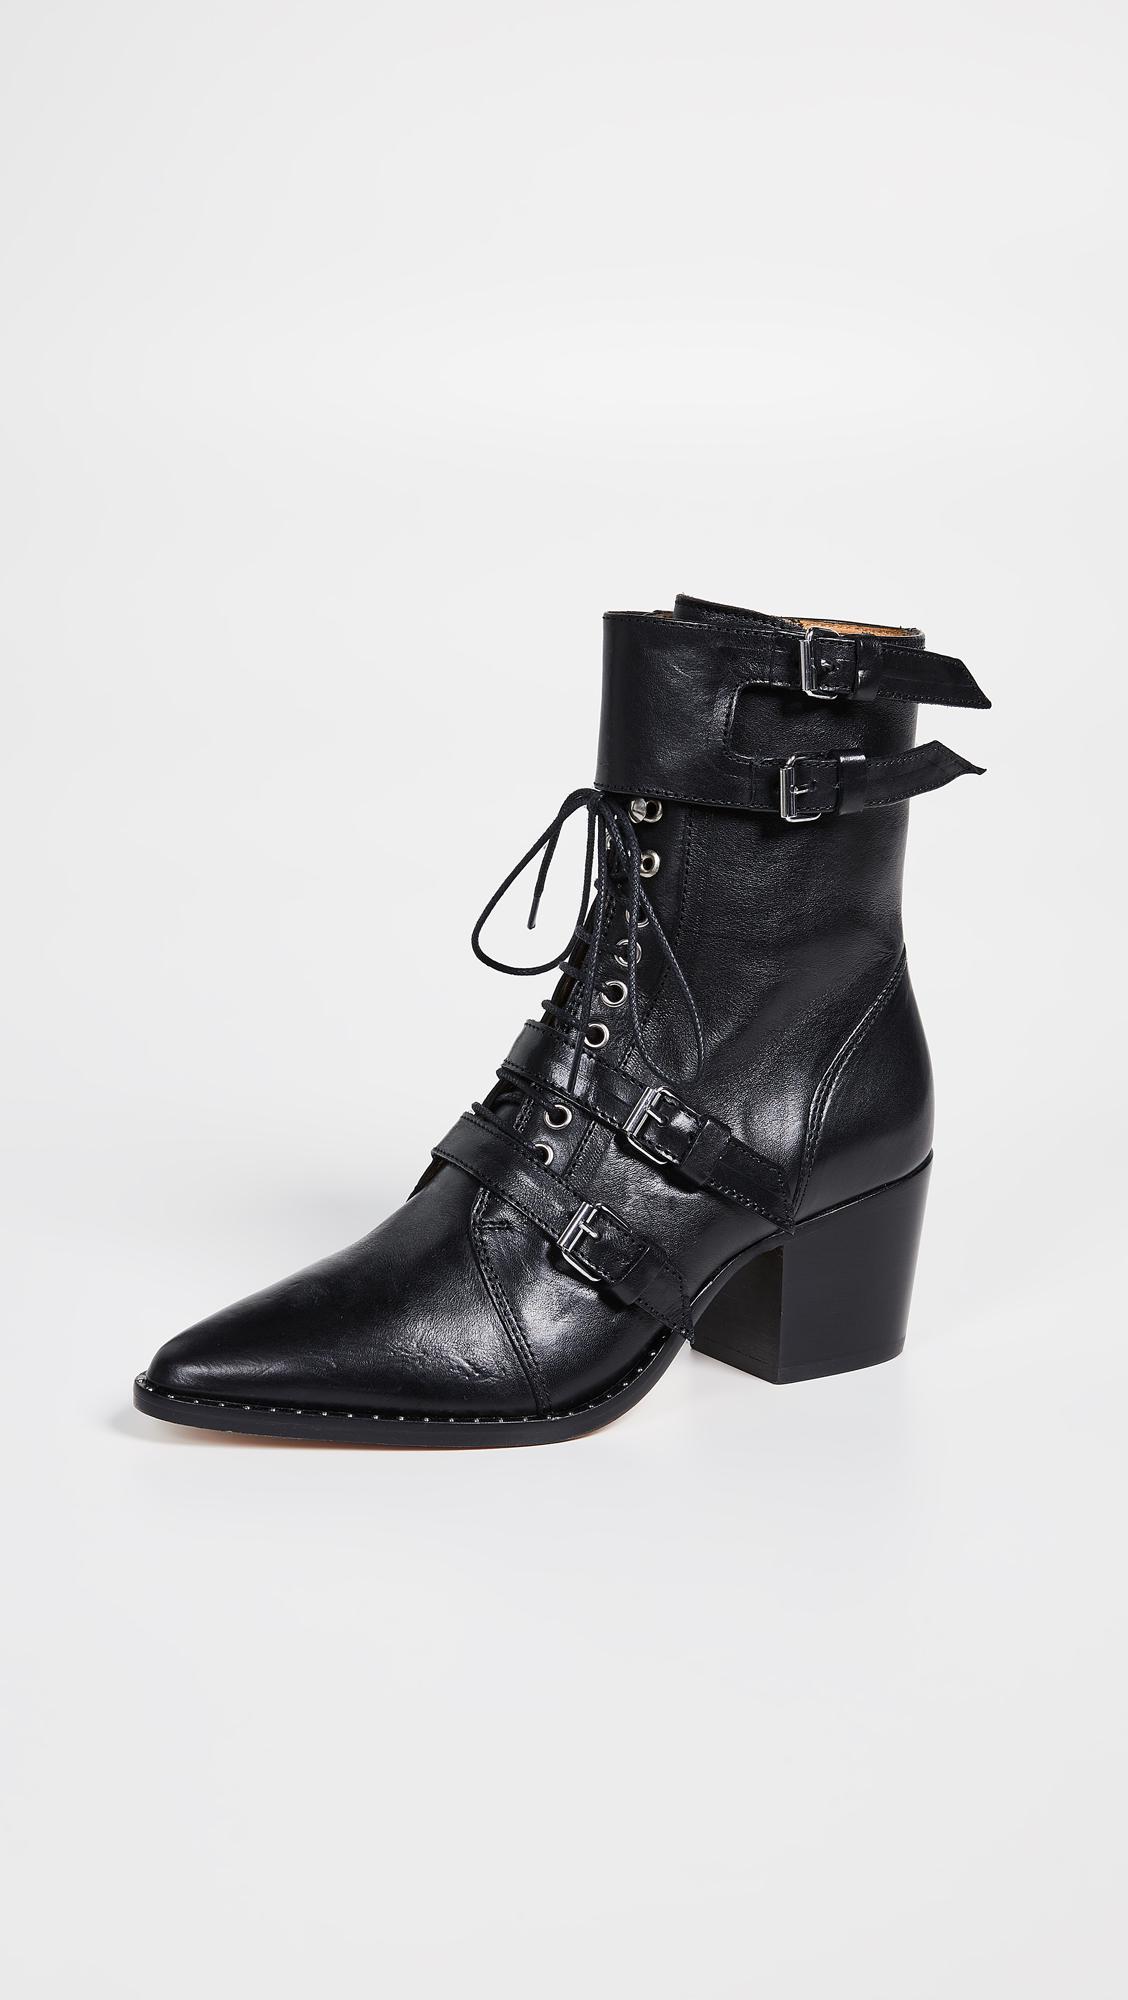 IRO Leather Lorna Boots in Black - Lyst